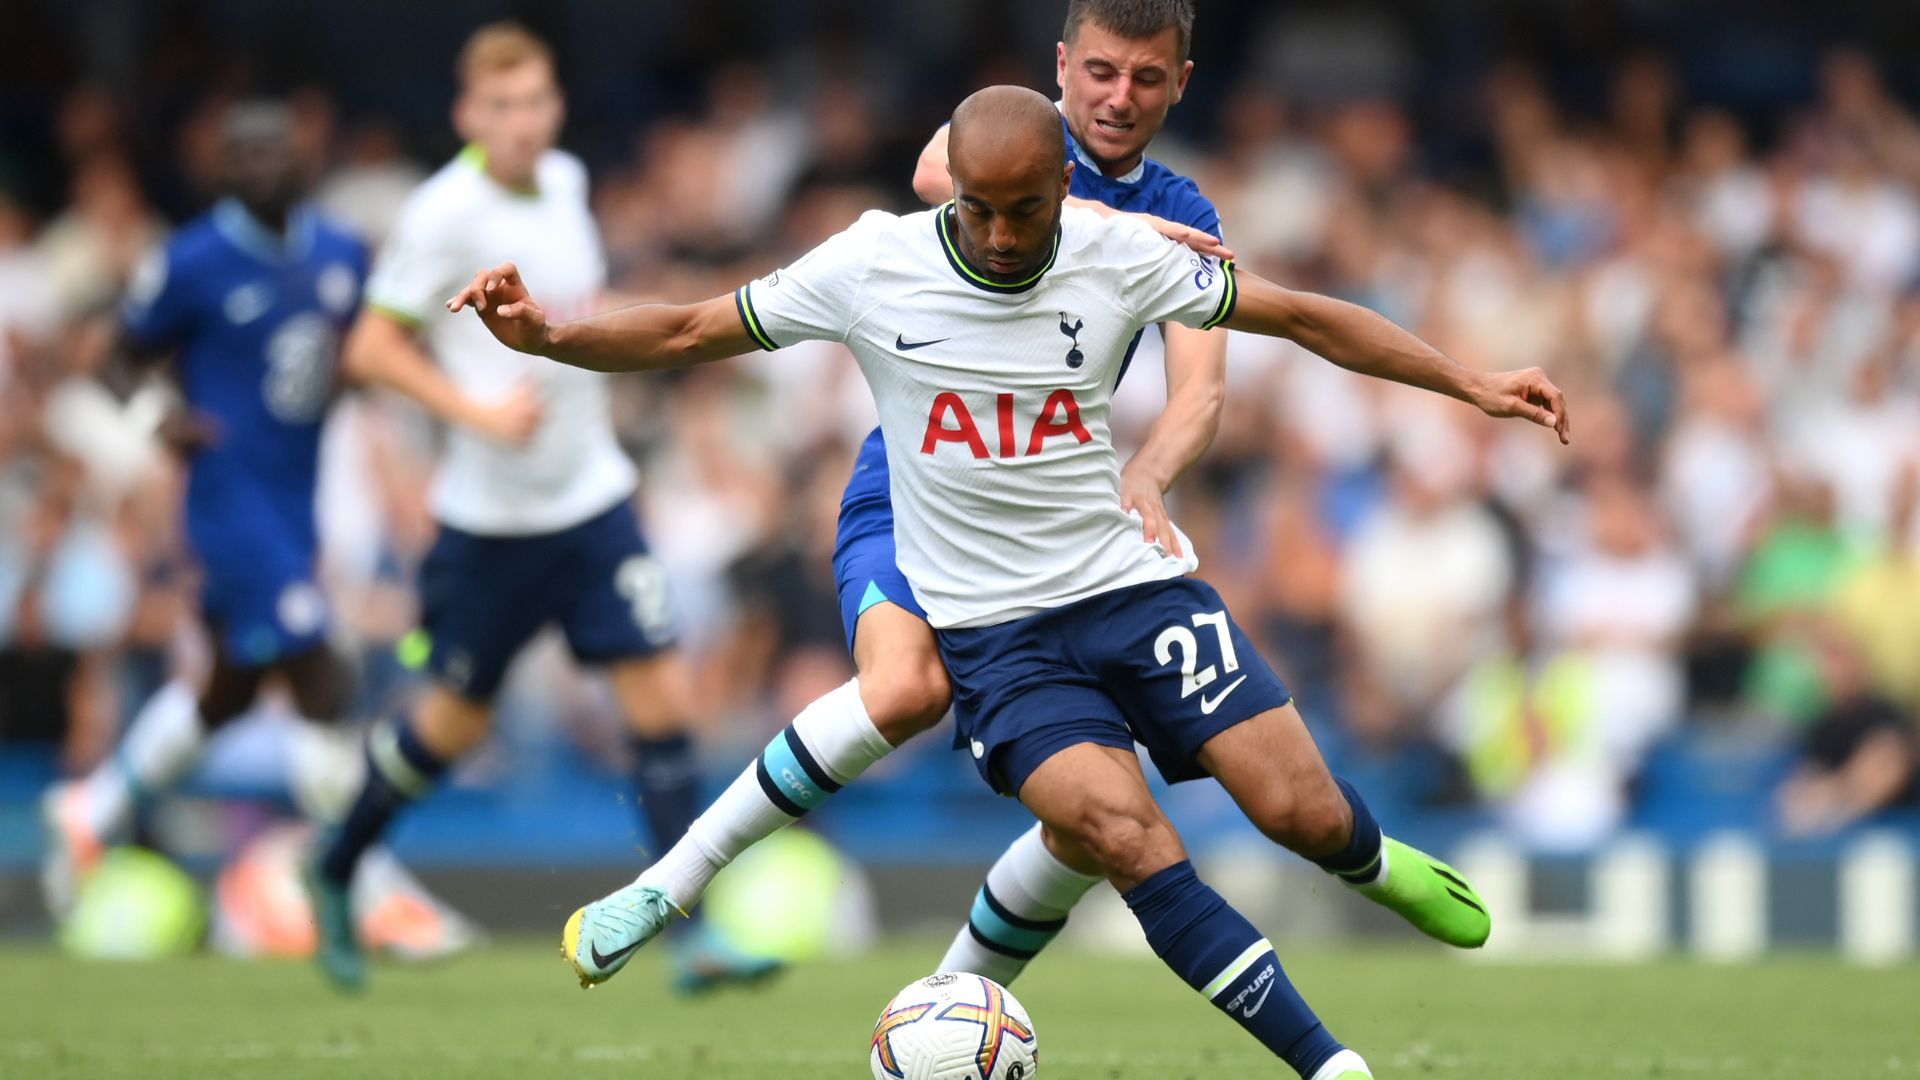 Lucas Moura in action for Tottenham, in a match against Chelsea (Credit: Getty Images)